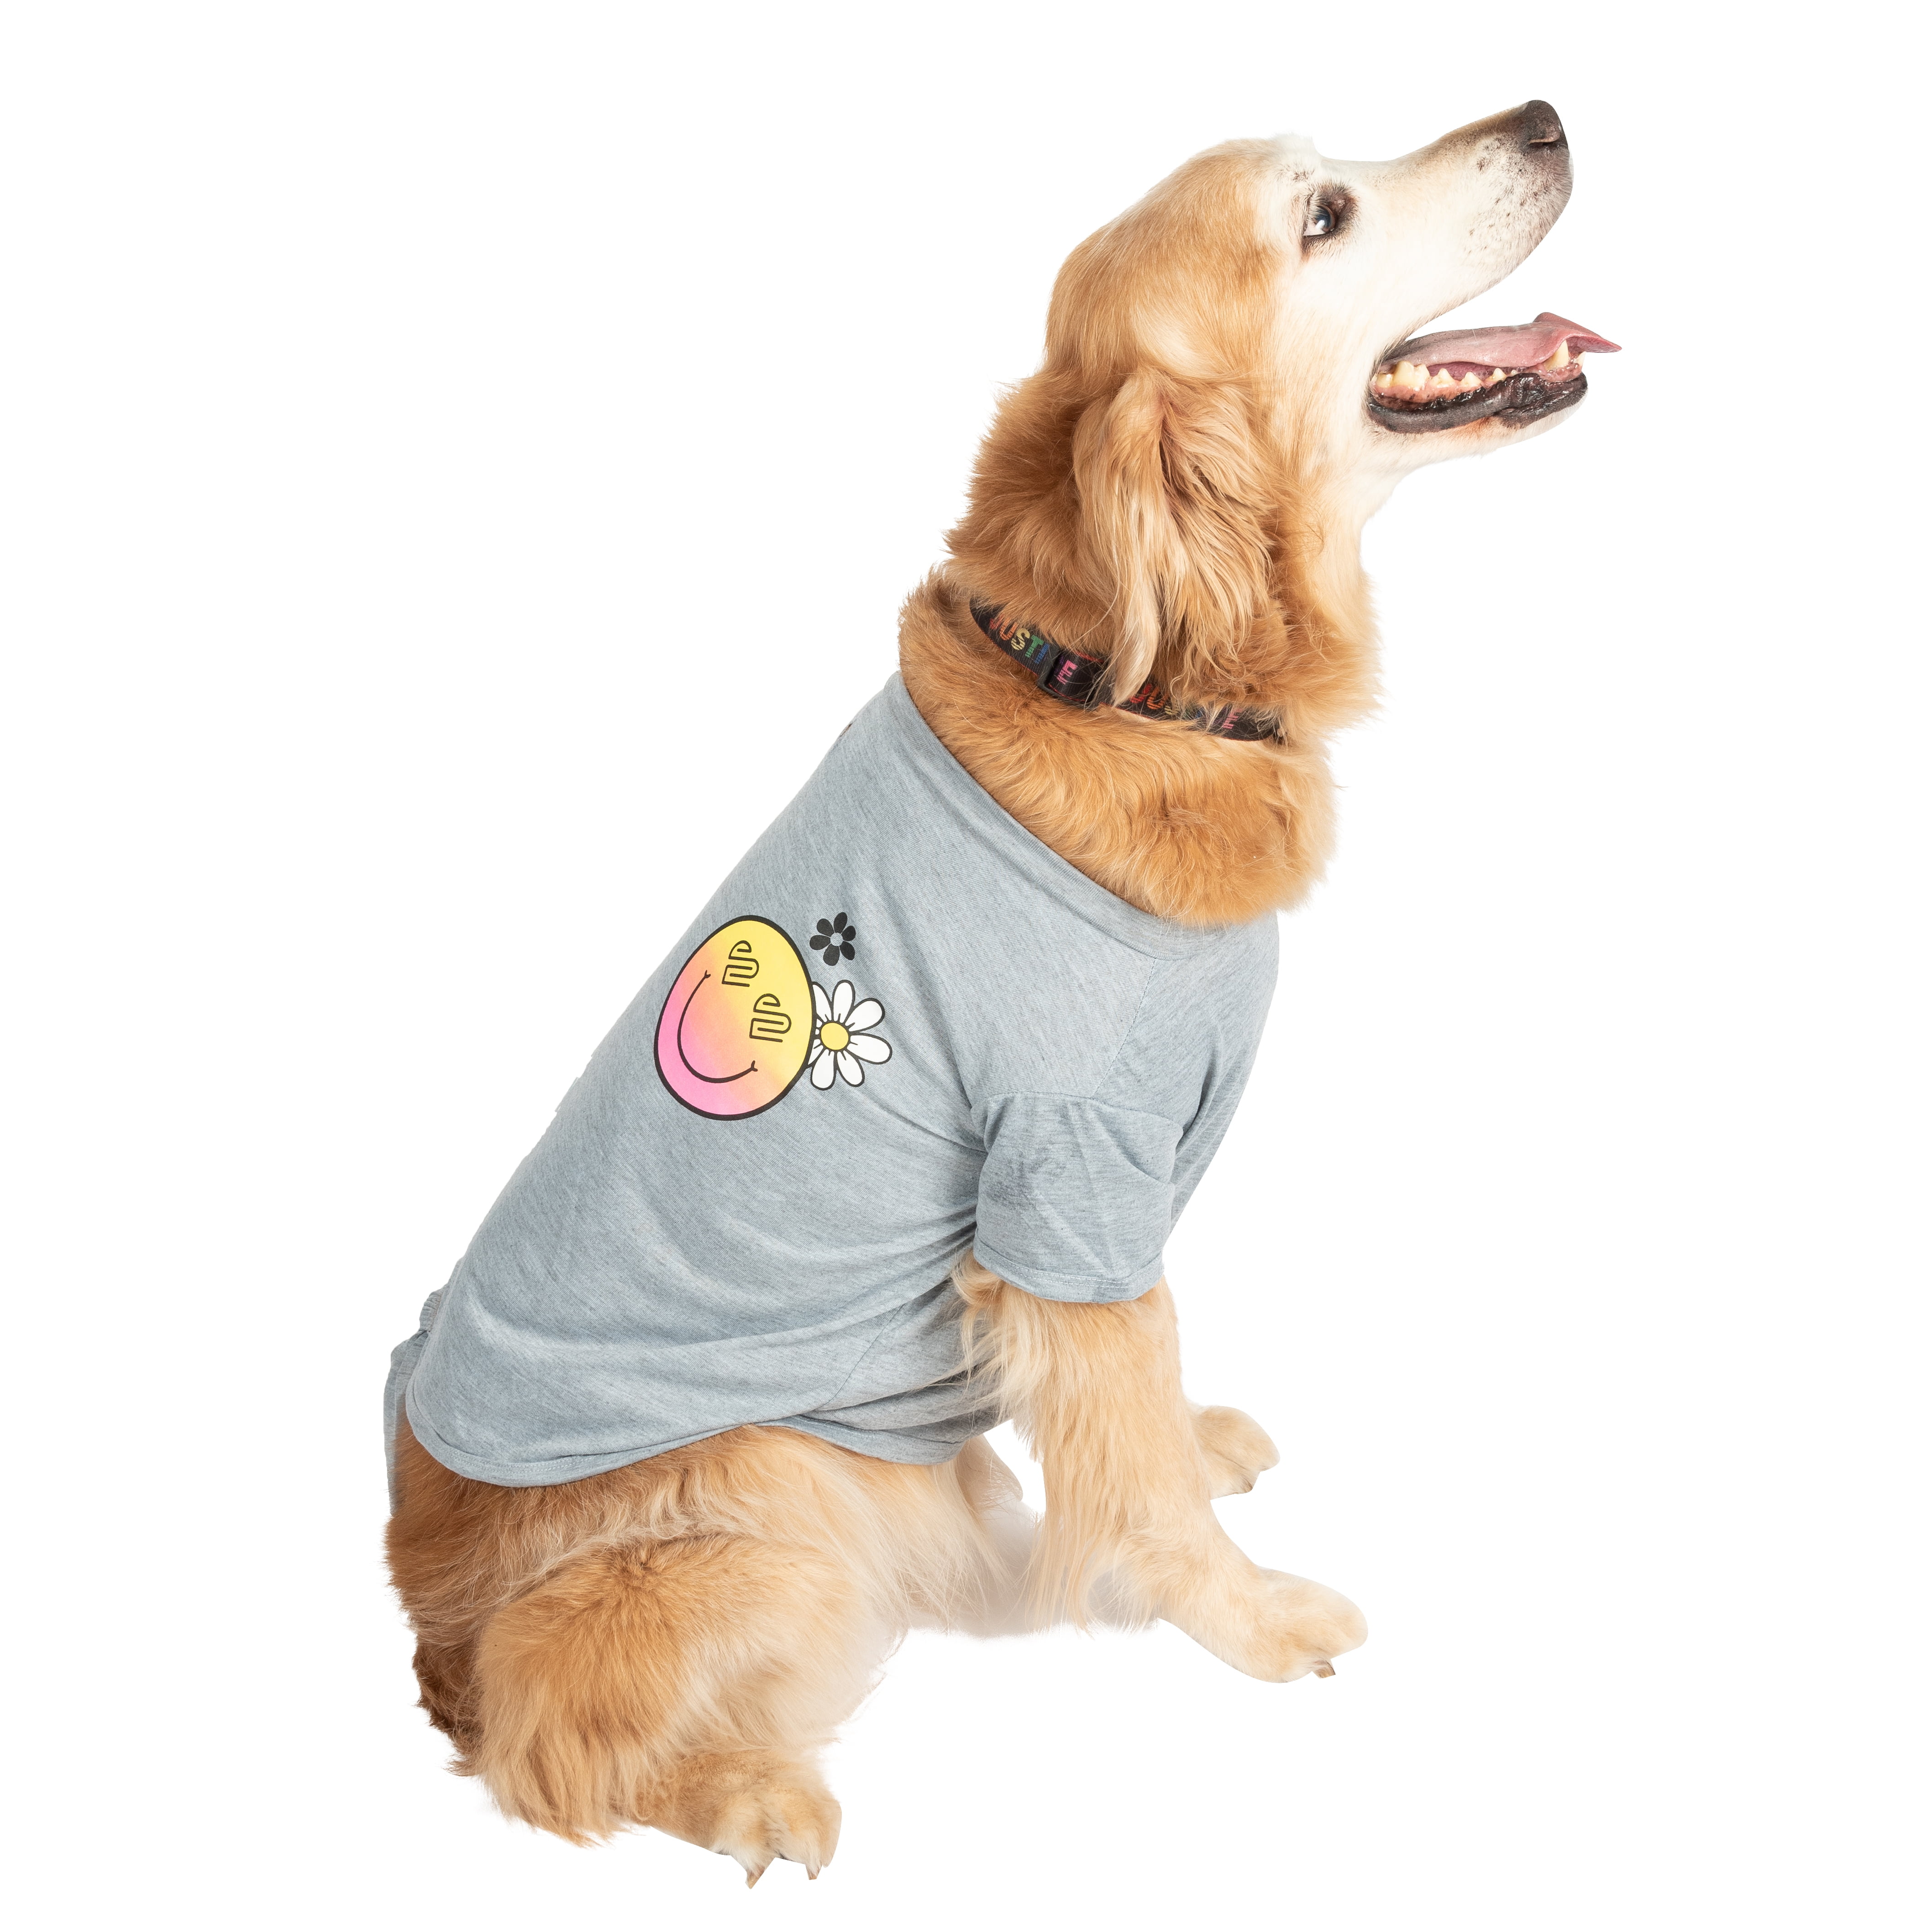 Justice Pet Front Tied Dog Tee Shirt, Gray, Large Size 